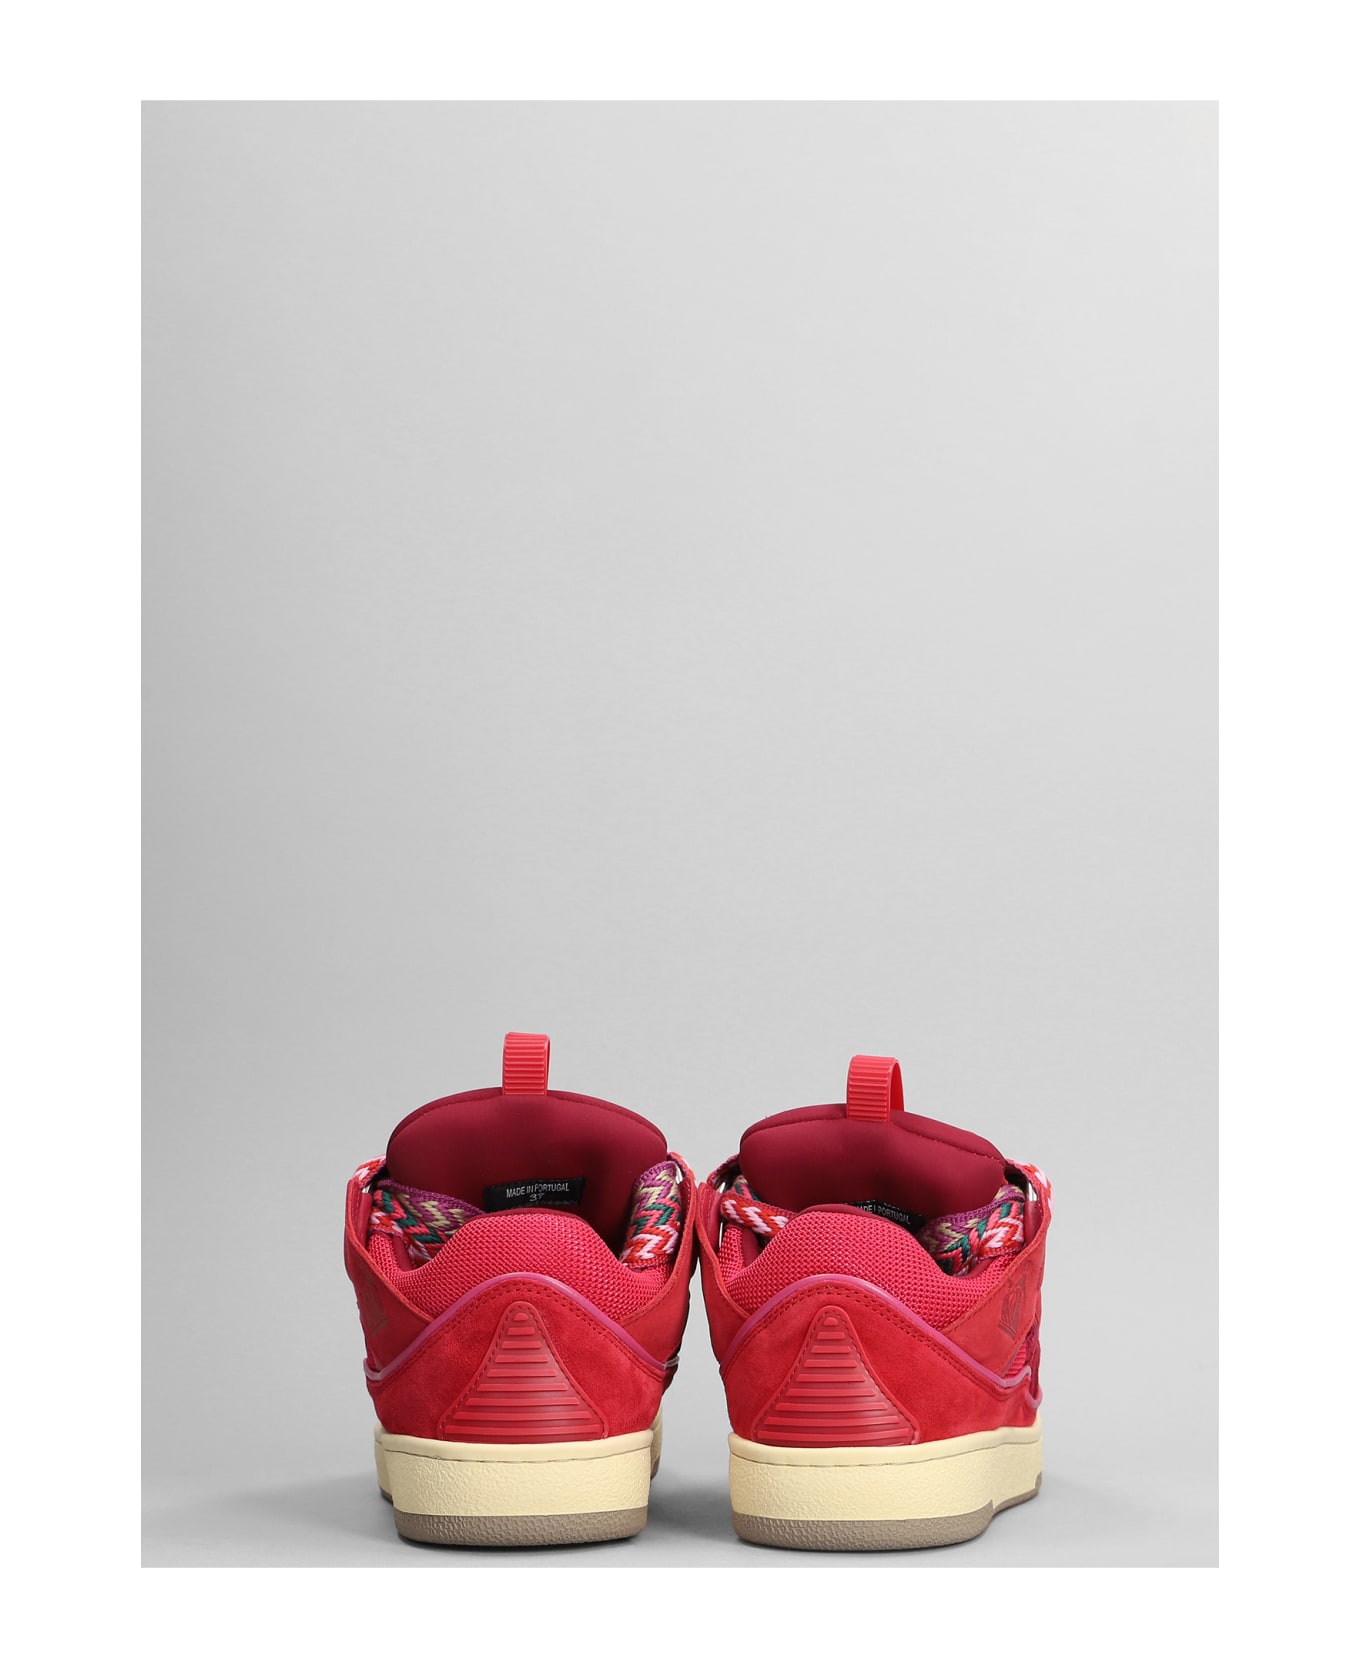 Lanvin Curb Sneakers In Fuxia Suede And Leather - fuxia